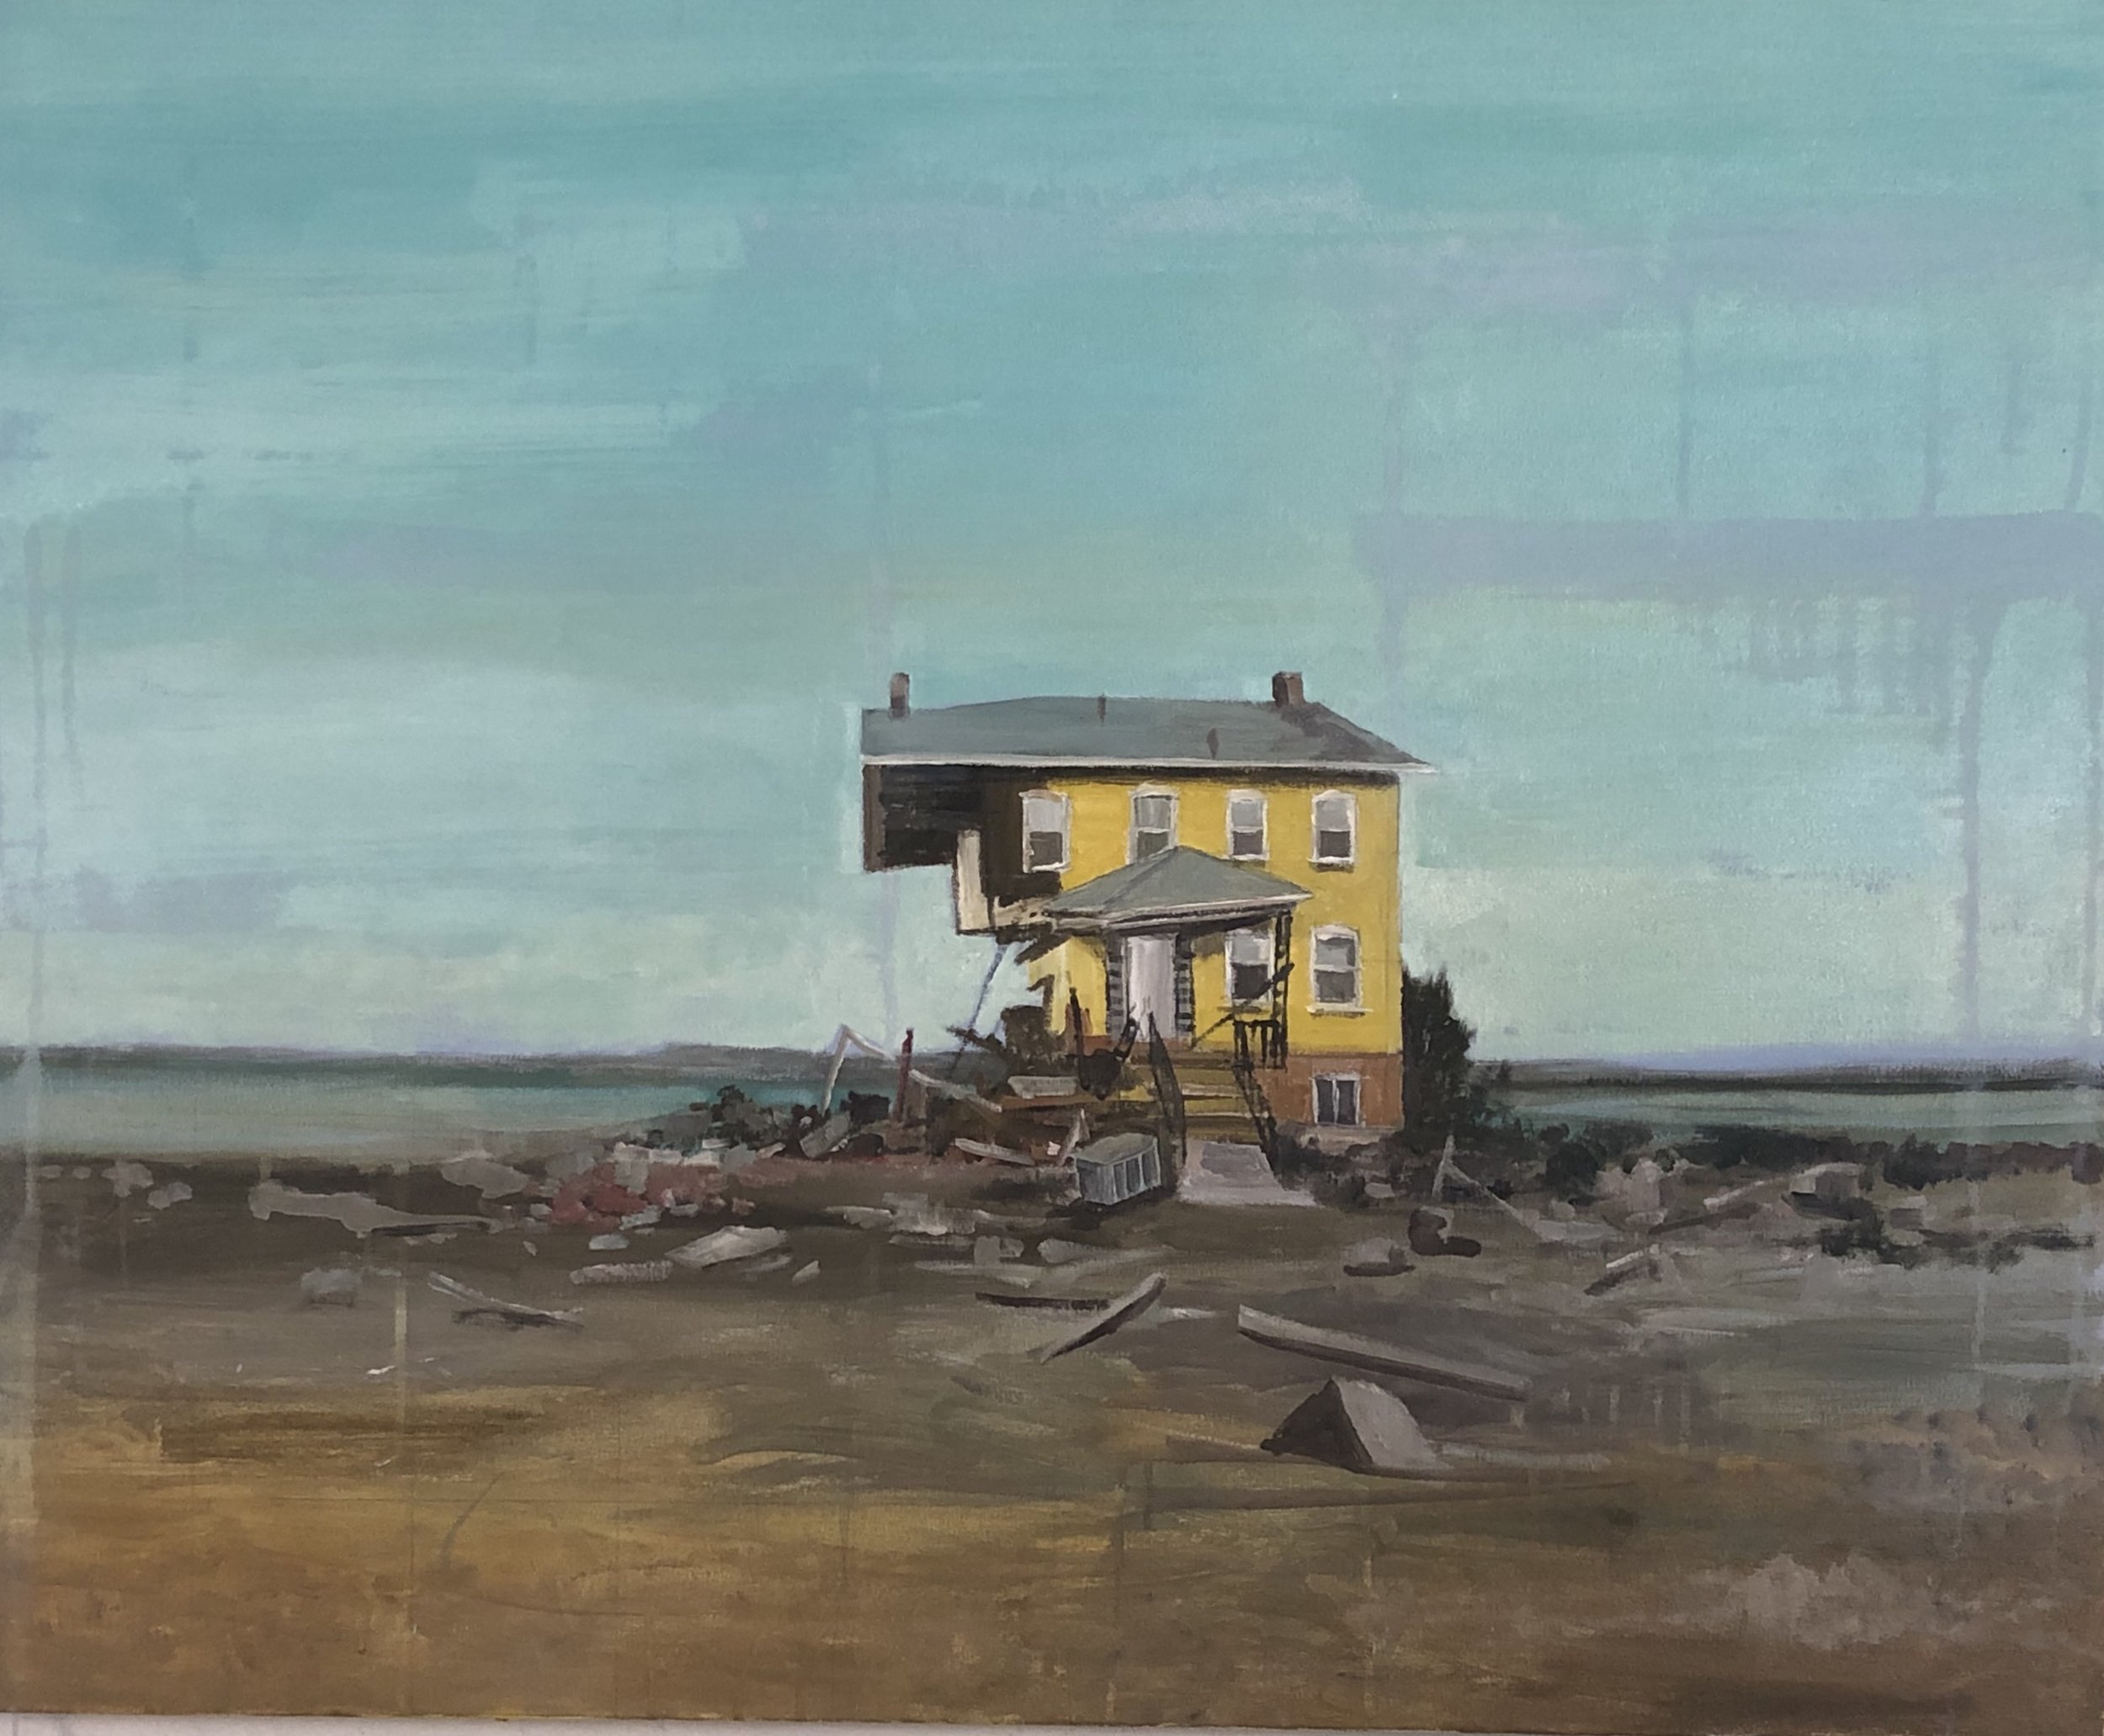    Vacation House #2  , 2019  Oil on canvas  32 x 39 in. 